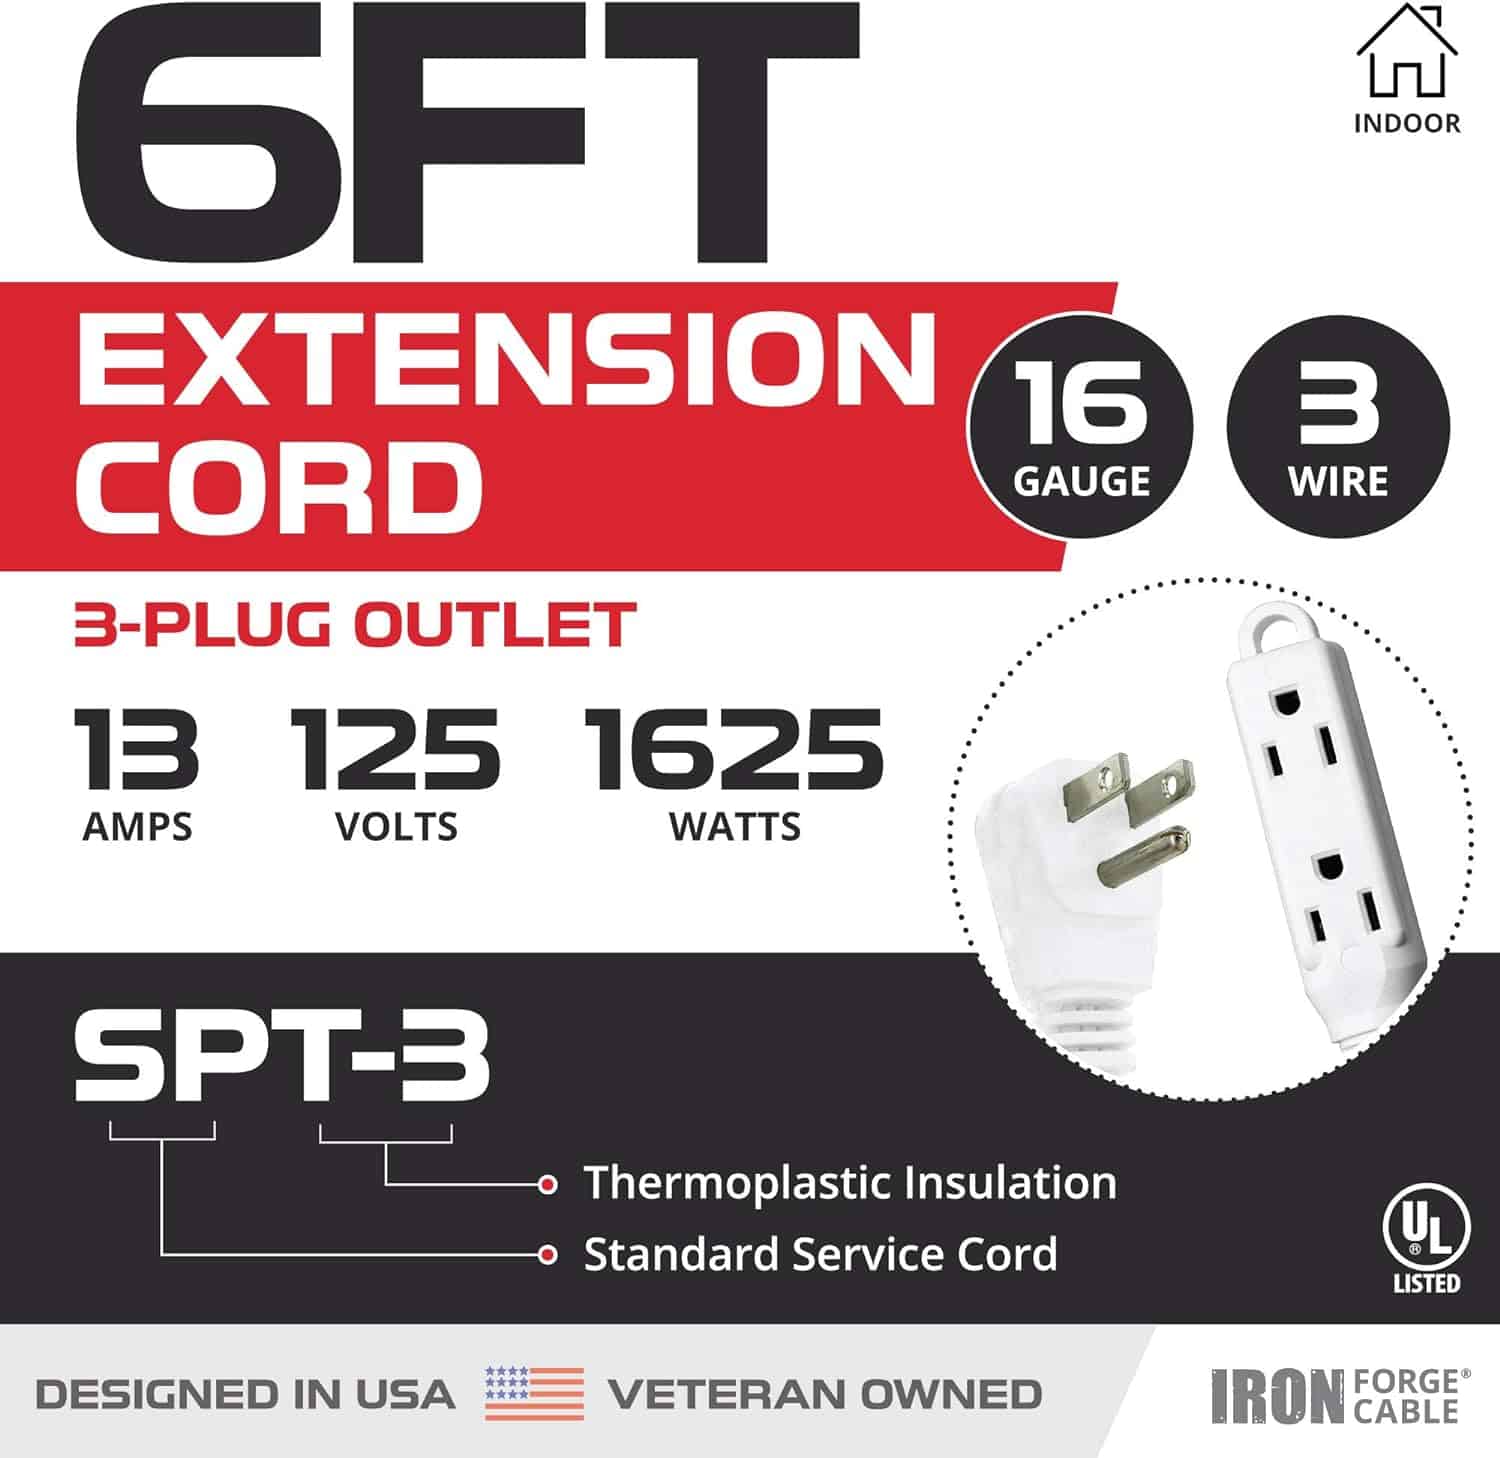 6-Ft-Extension-Cord-with-3-Electrical-Power-Outlet-16-3-Durable-White-Cable